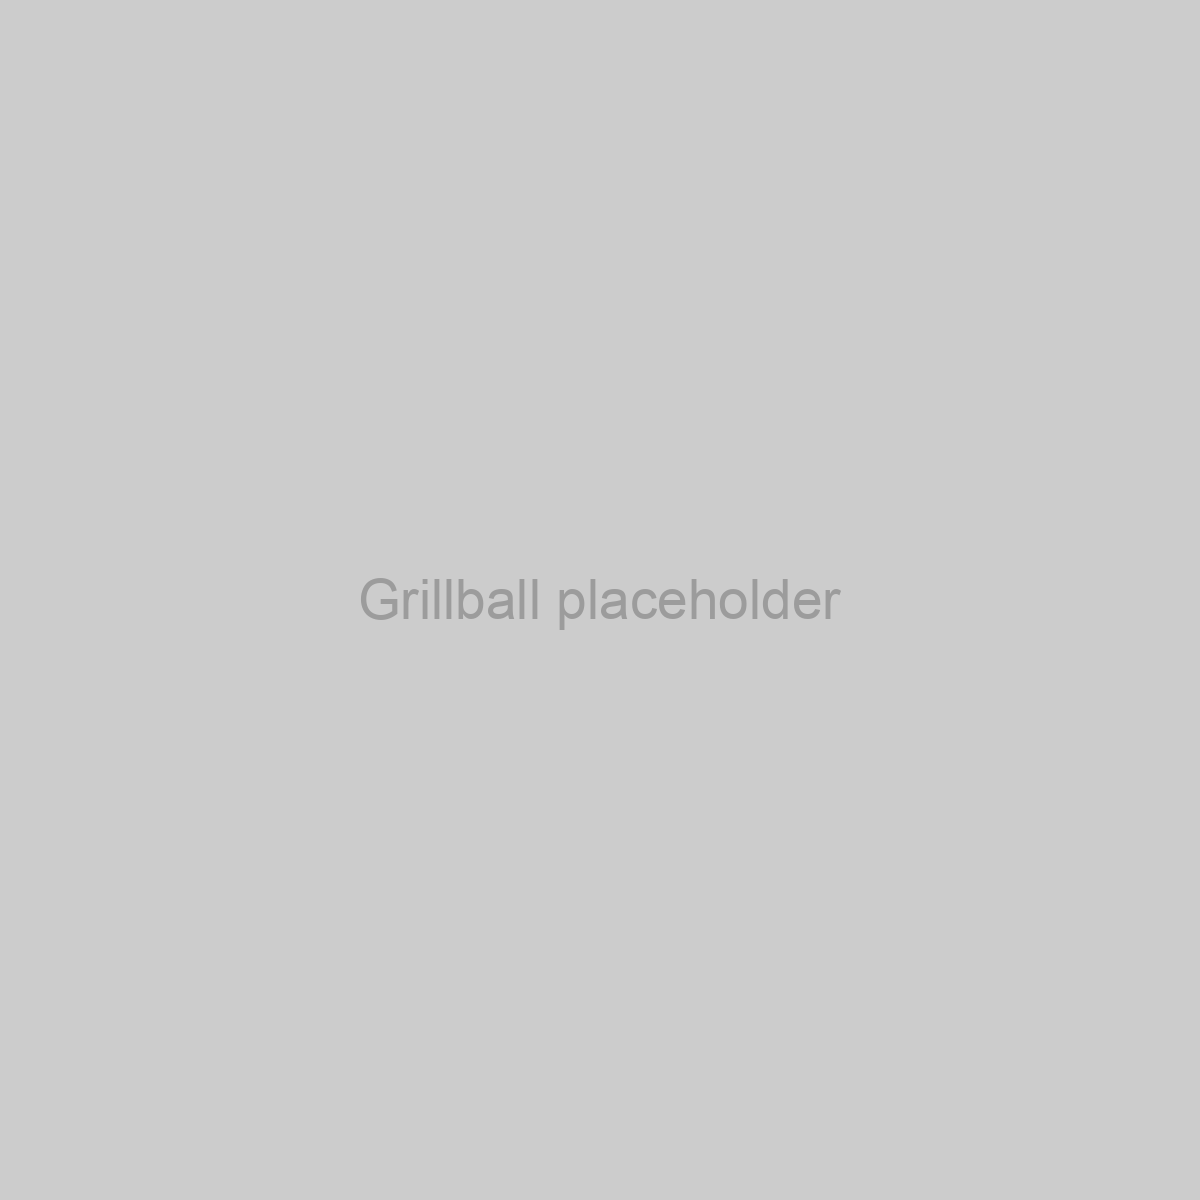 Grillball Placeholder Image